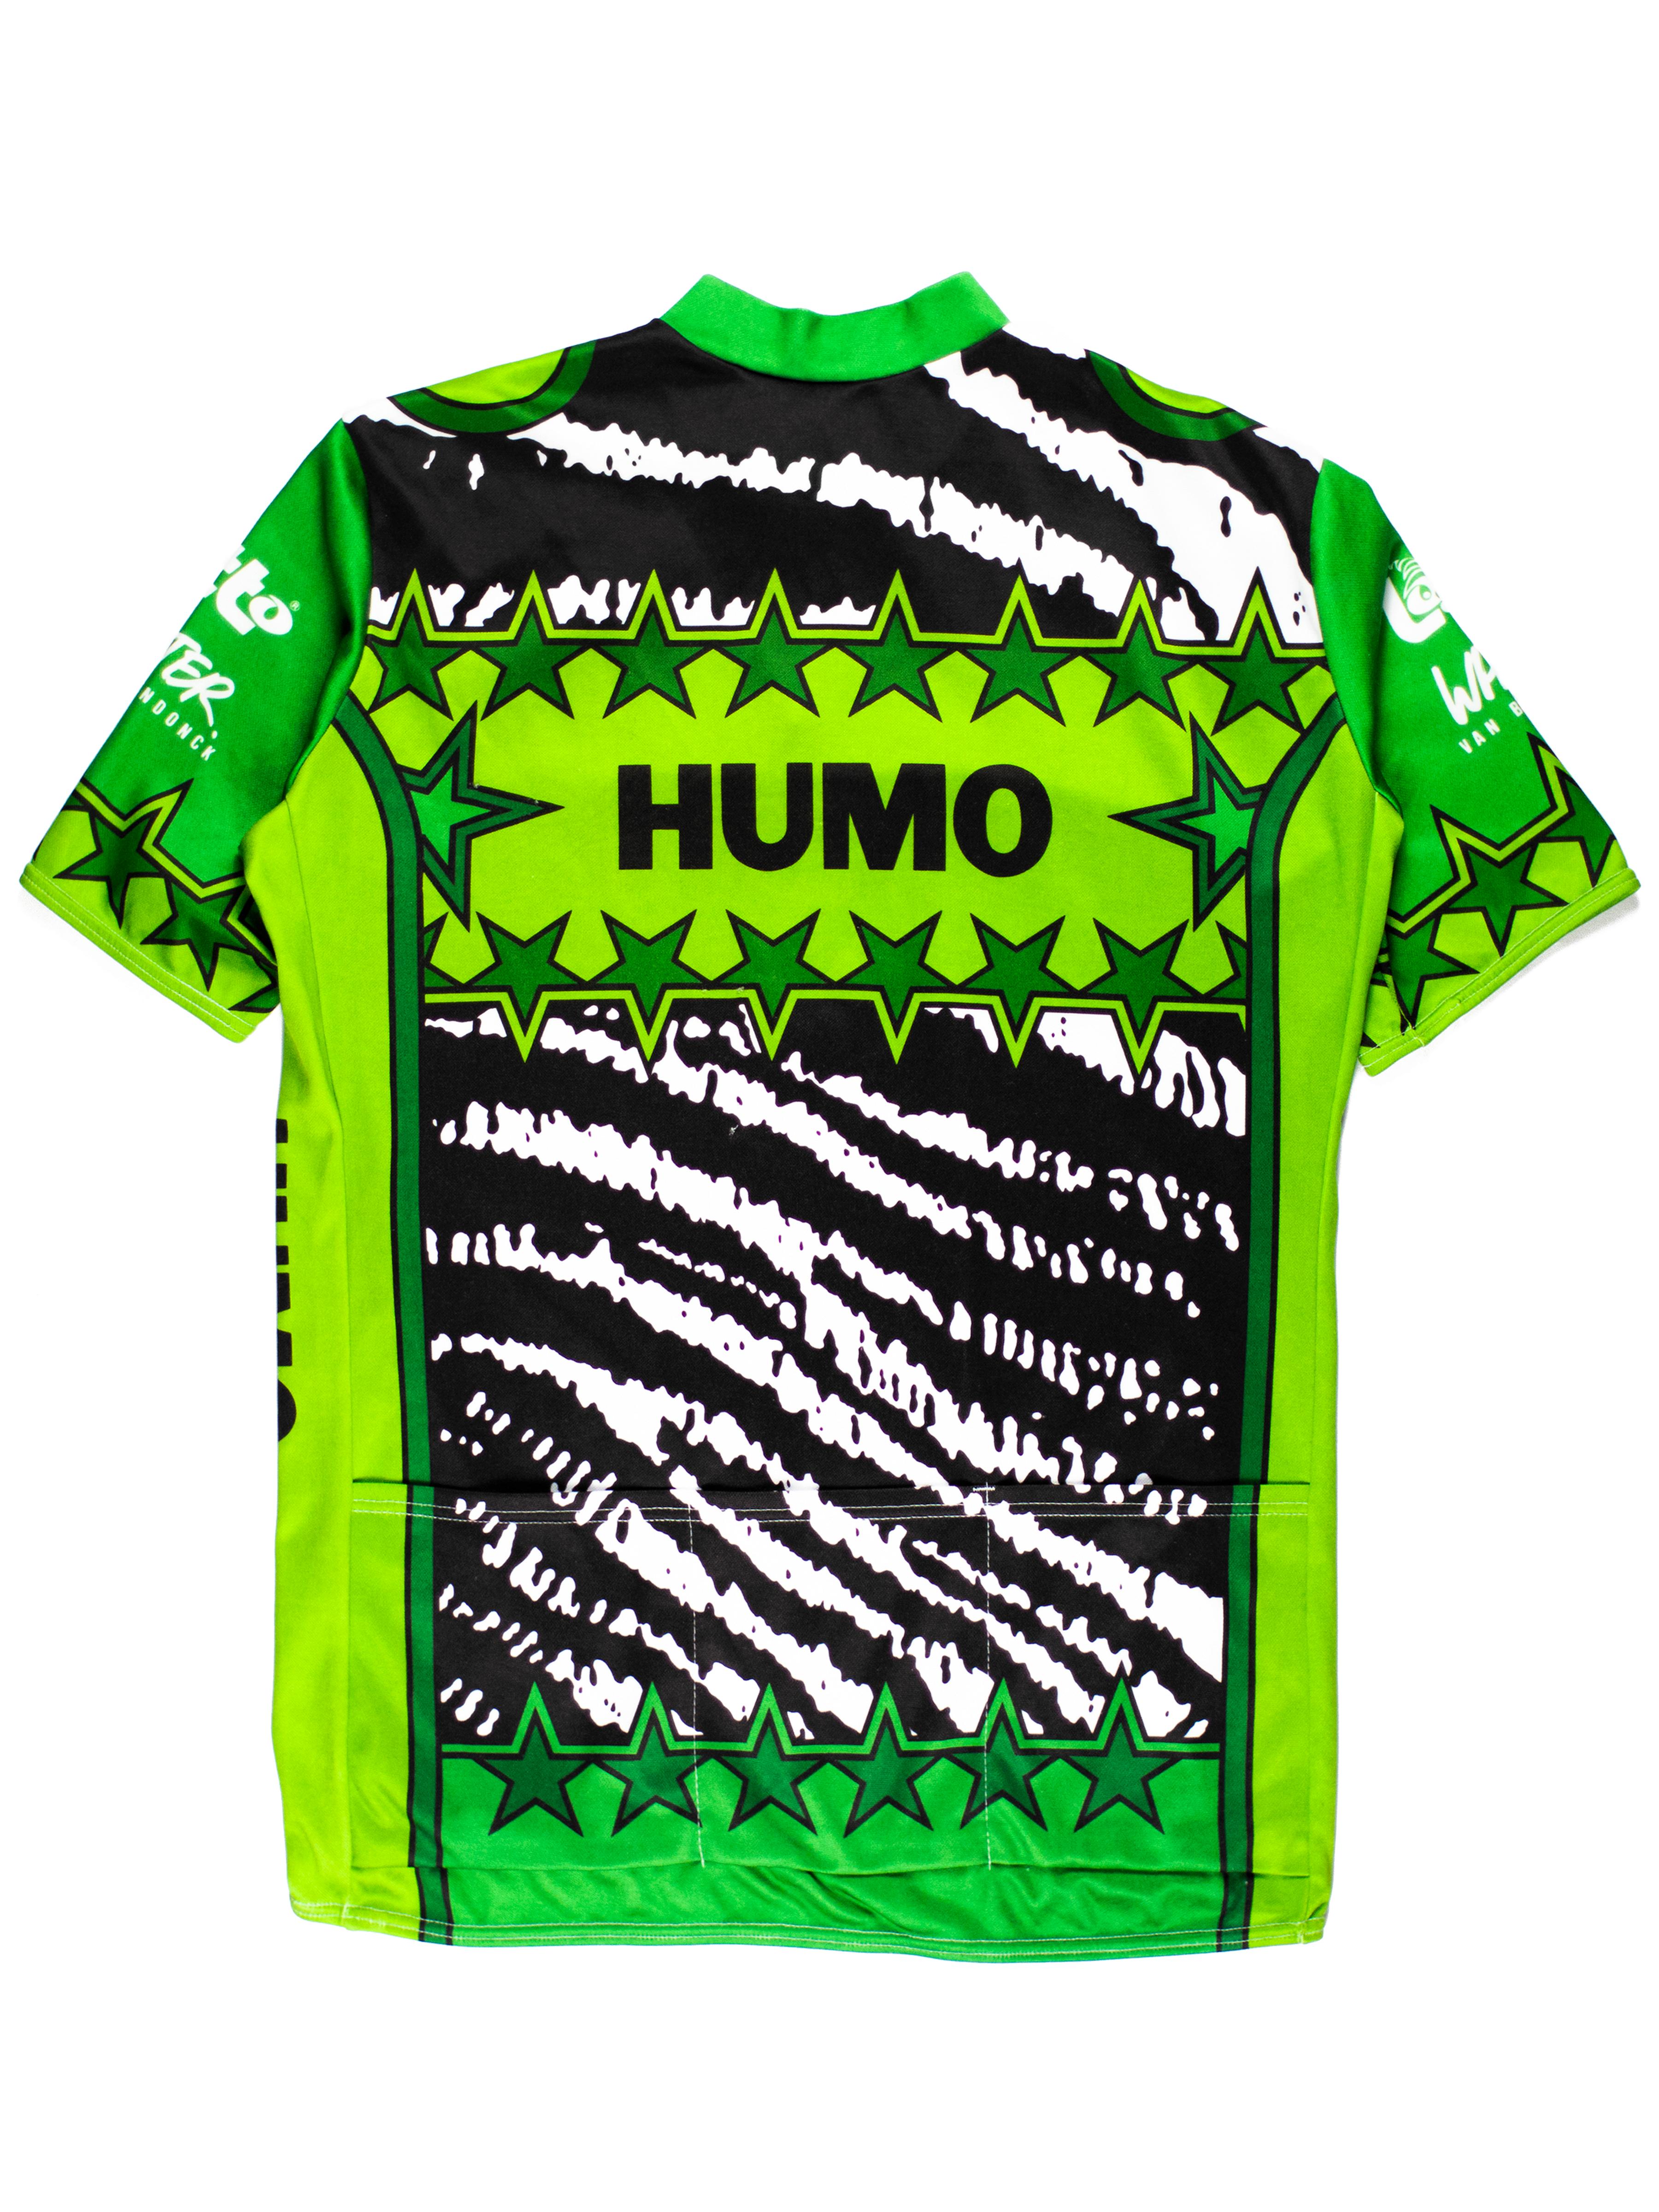 This cycling top was made in 1989 to commemorate the Torhout-Werchter cycling tour in Belgium, which had taken place earlier in the year. Various sponsorships line the shirt, including Humo, a Belgium tabloid, and Lotto, the Belgian lottery. This